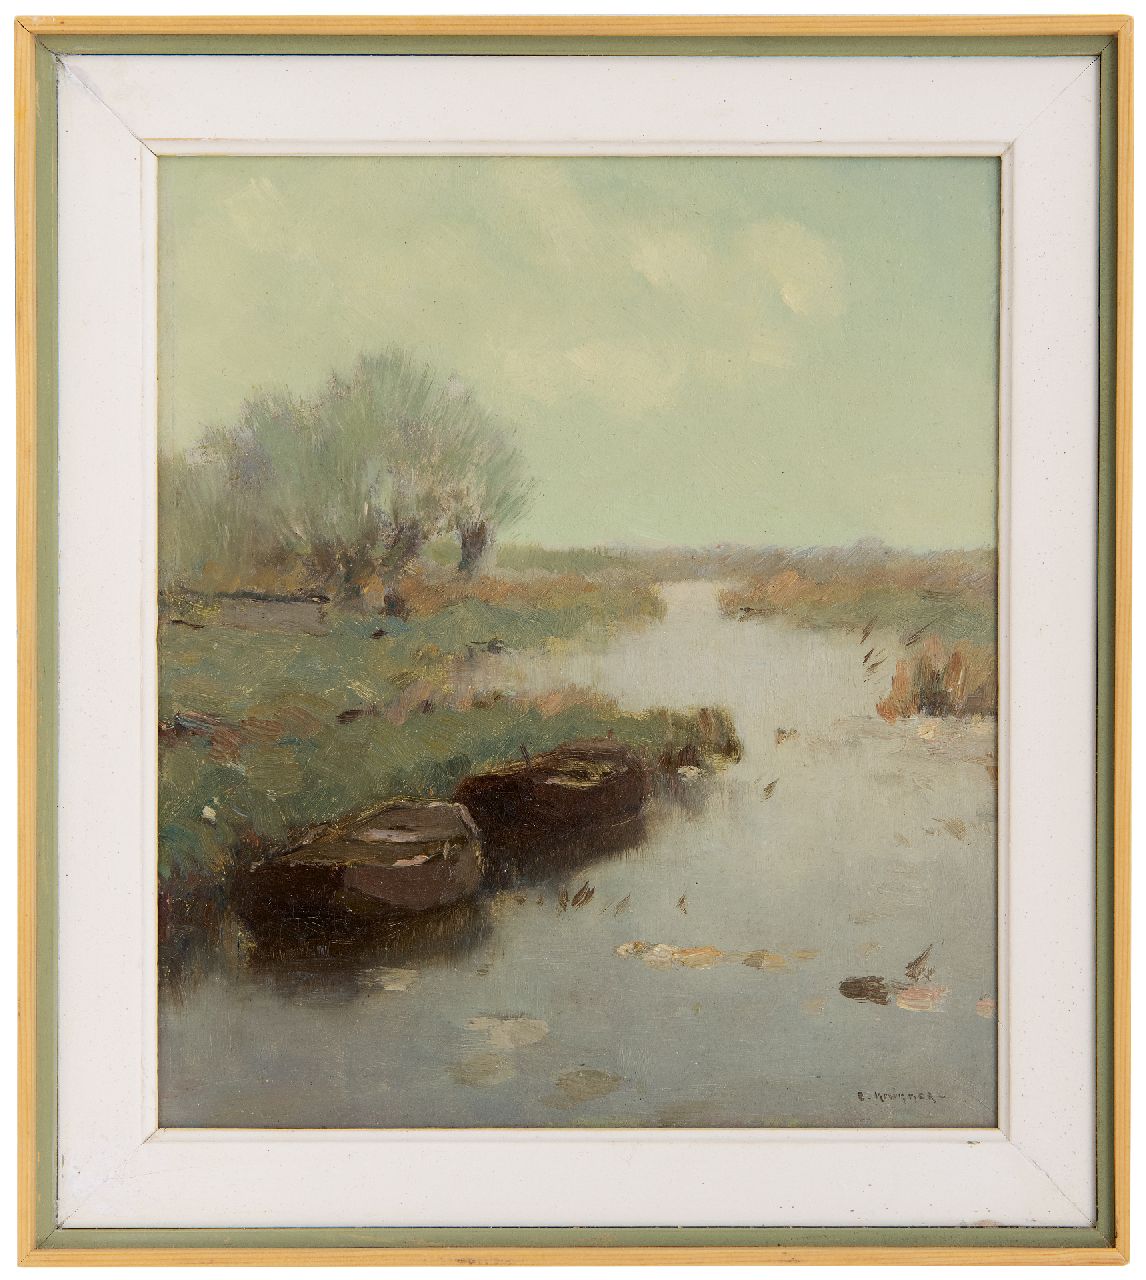 Knikker A.  | Aris Knikker, Moored rowing boats in a canal, oil on painter's board 25.4 x 21.4 cm, signed l.r.